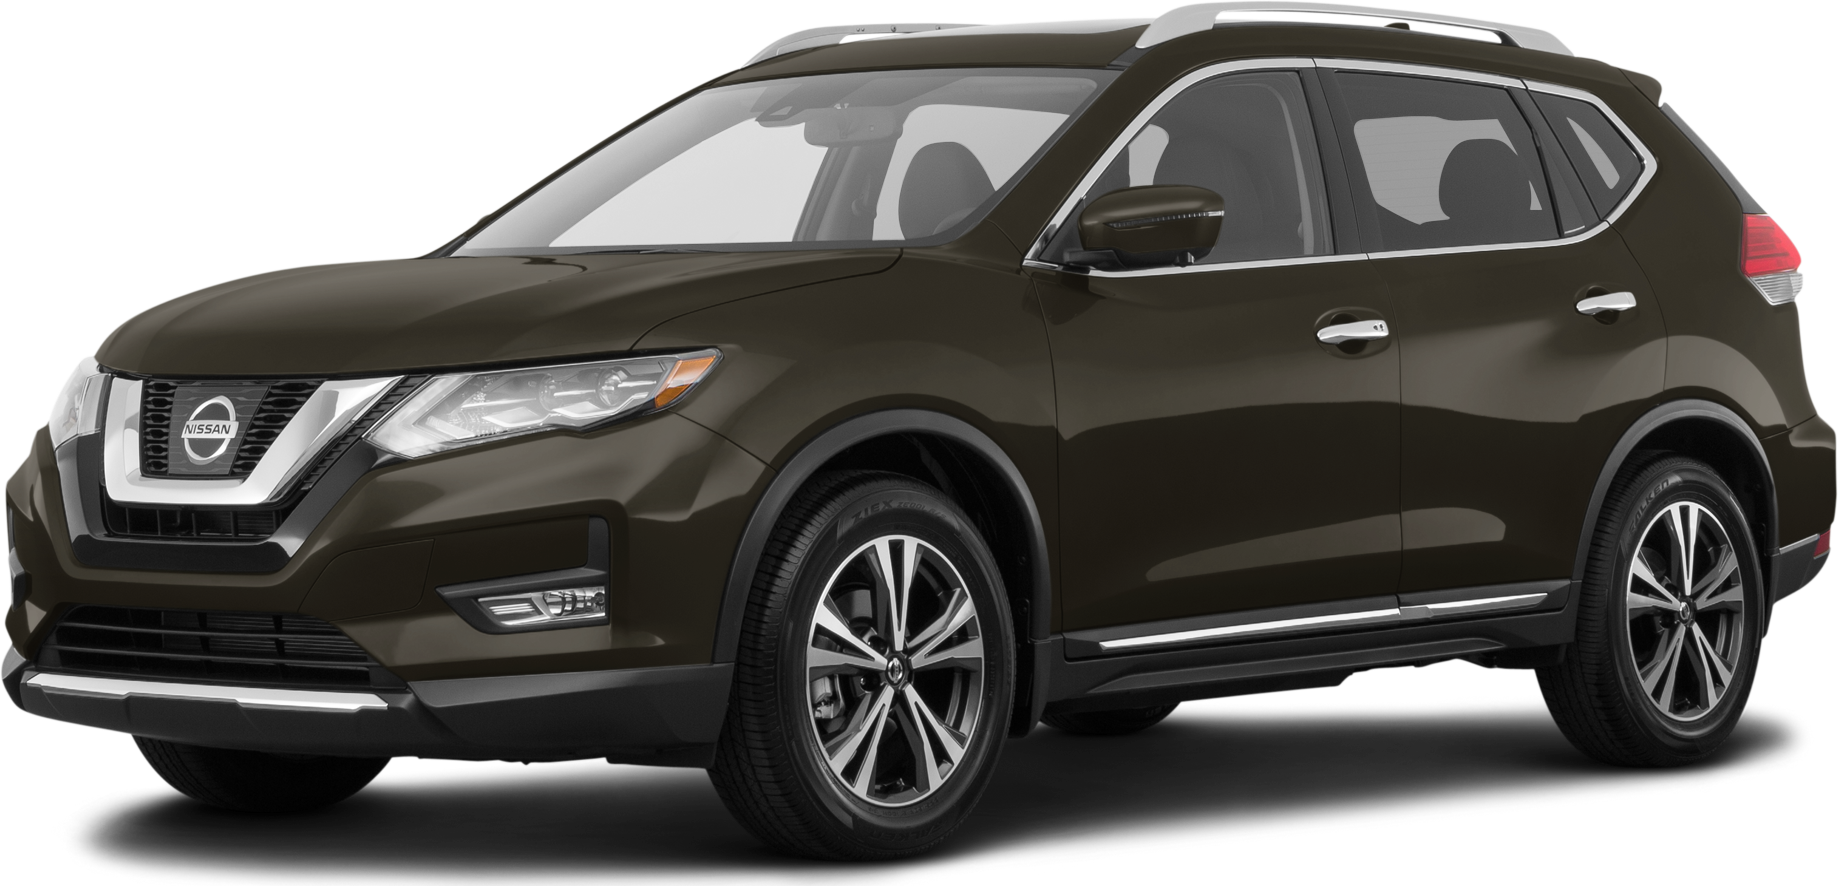 2017 Nissan Rogue Value Ratings